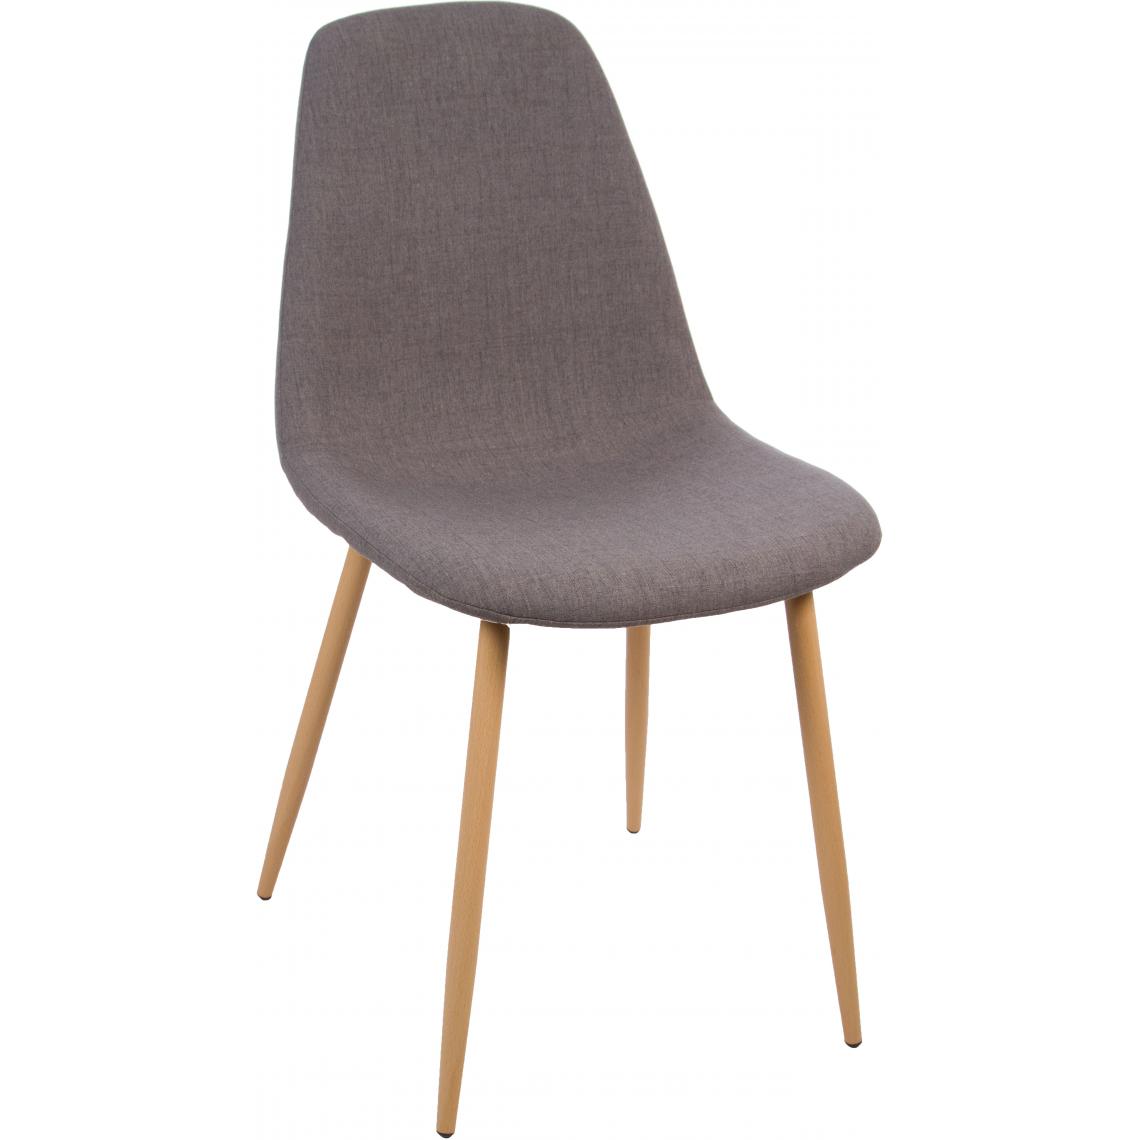 3S. x Home - Chaise Scandinave Grise OKA - Chaises